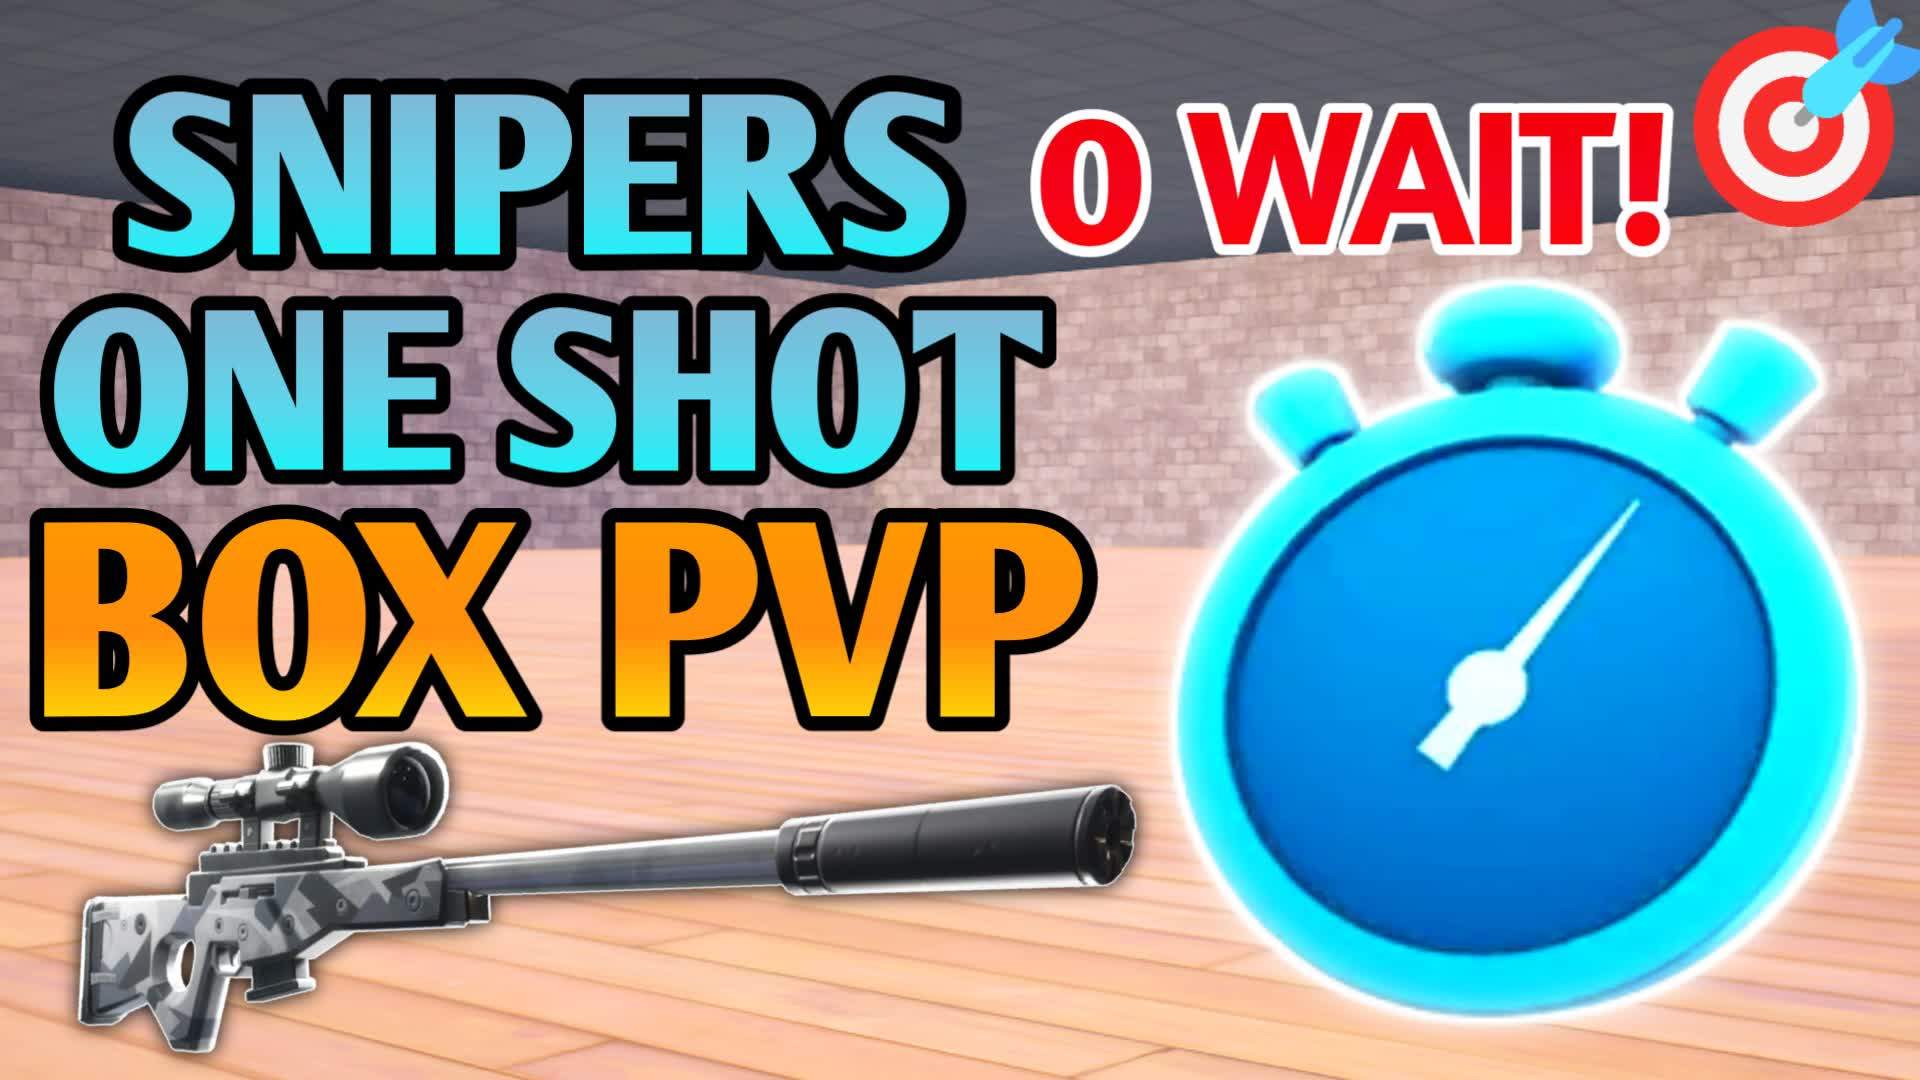 🎯 BOX PVP SNIPERS (ONE SHOT)